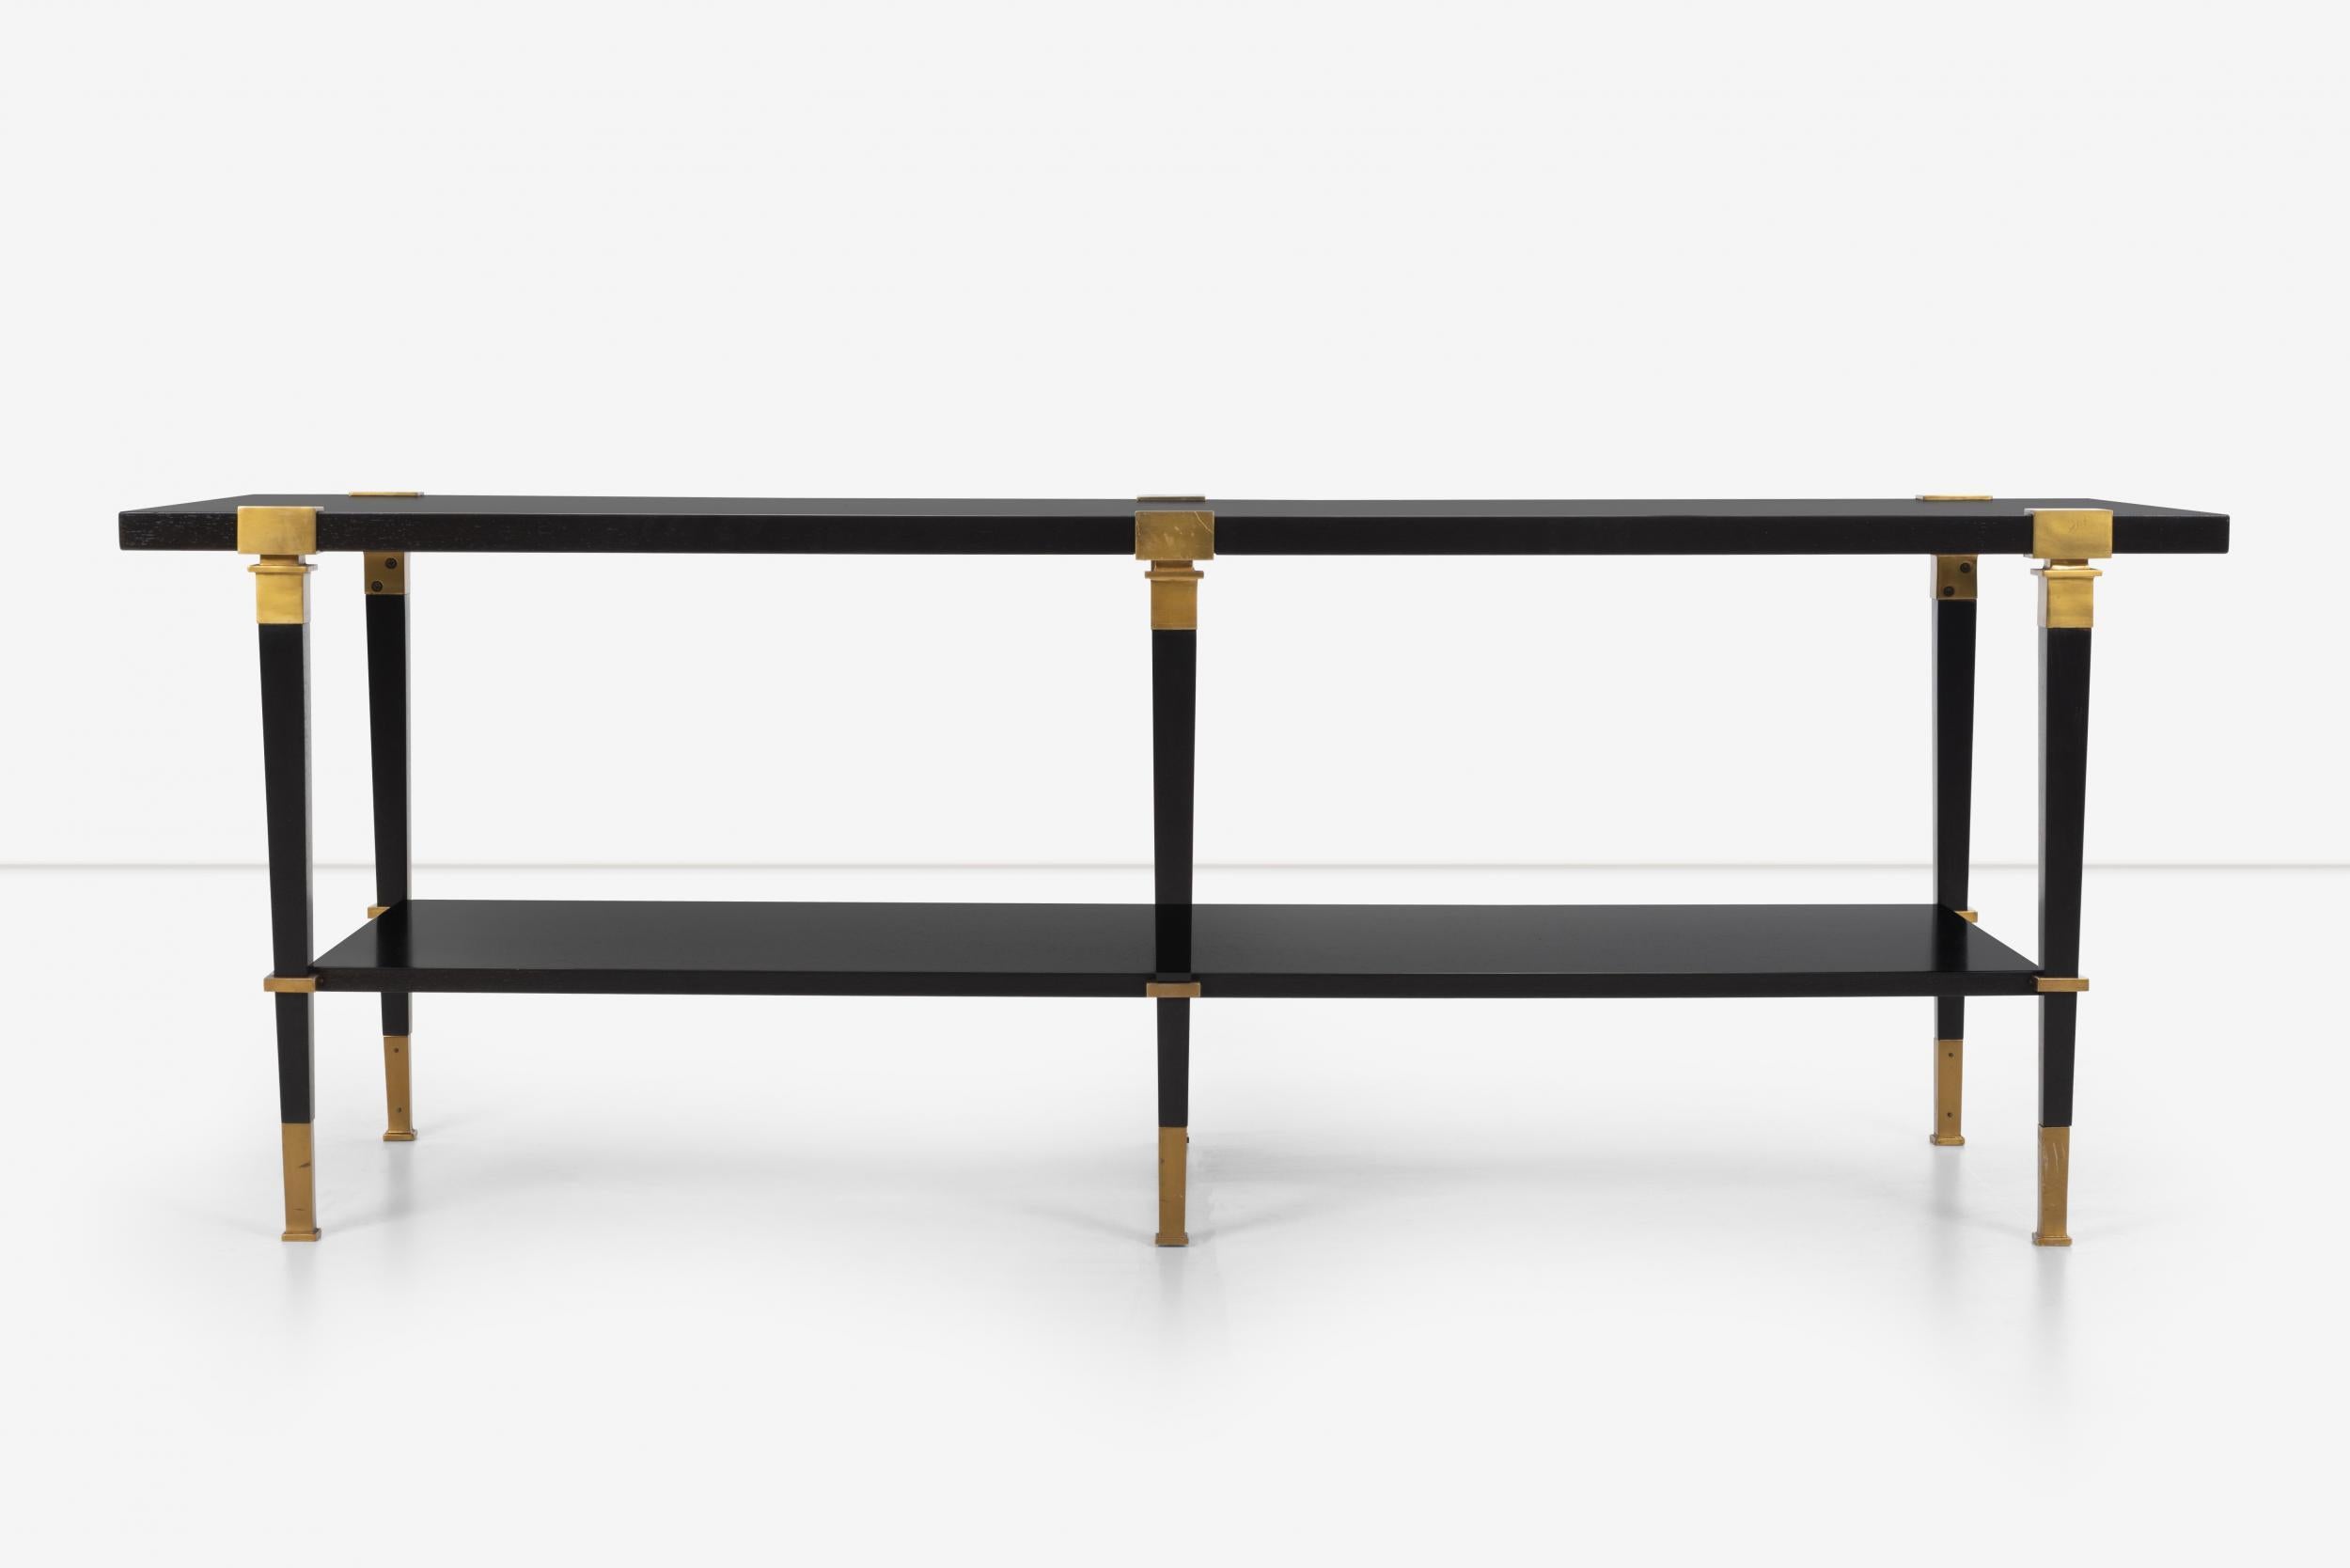 Andre Arbus for Baker Avenue Cocktail table with lower shelf, solid walnut with ebonized finish and disengaged solid brass capitals over square tapered legs with brass feet.
Arbus designed this in 1958 for Paris Gallery Owner Aime Maeght on Avenue